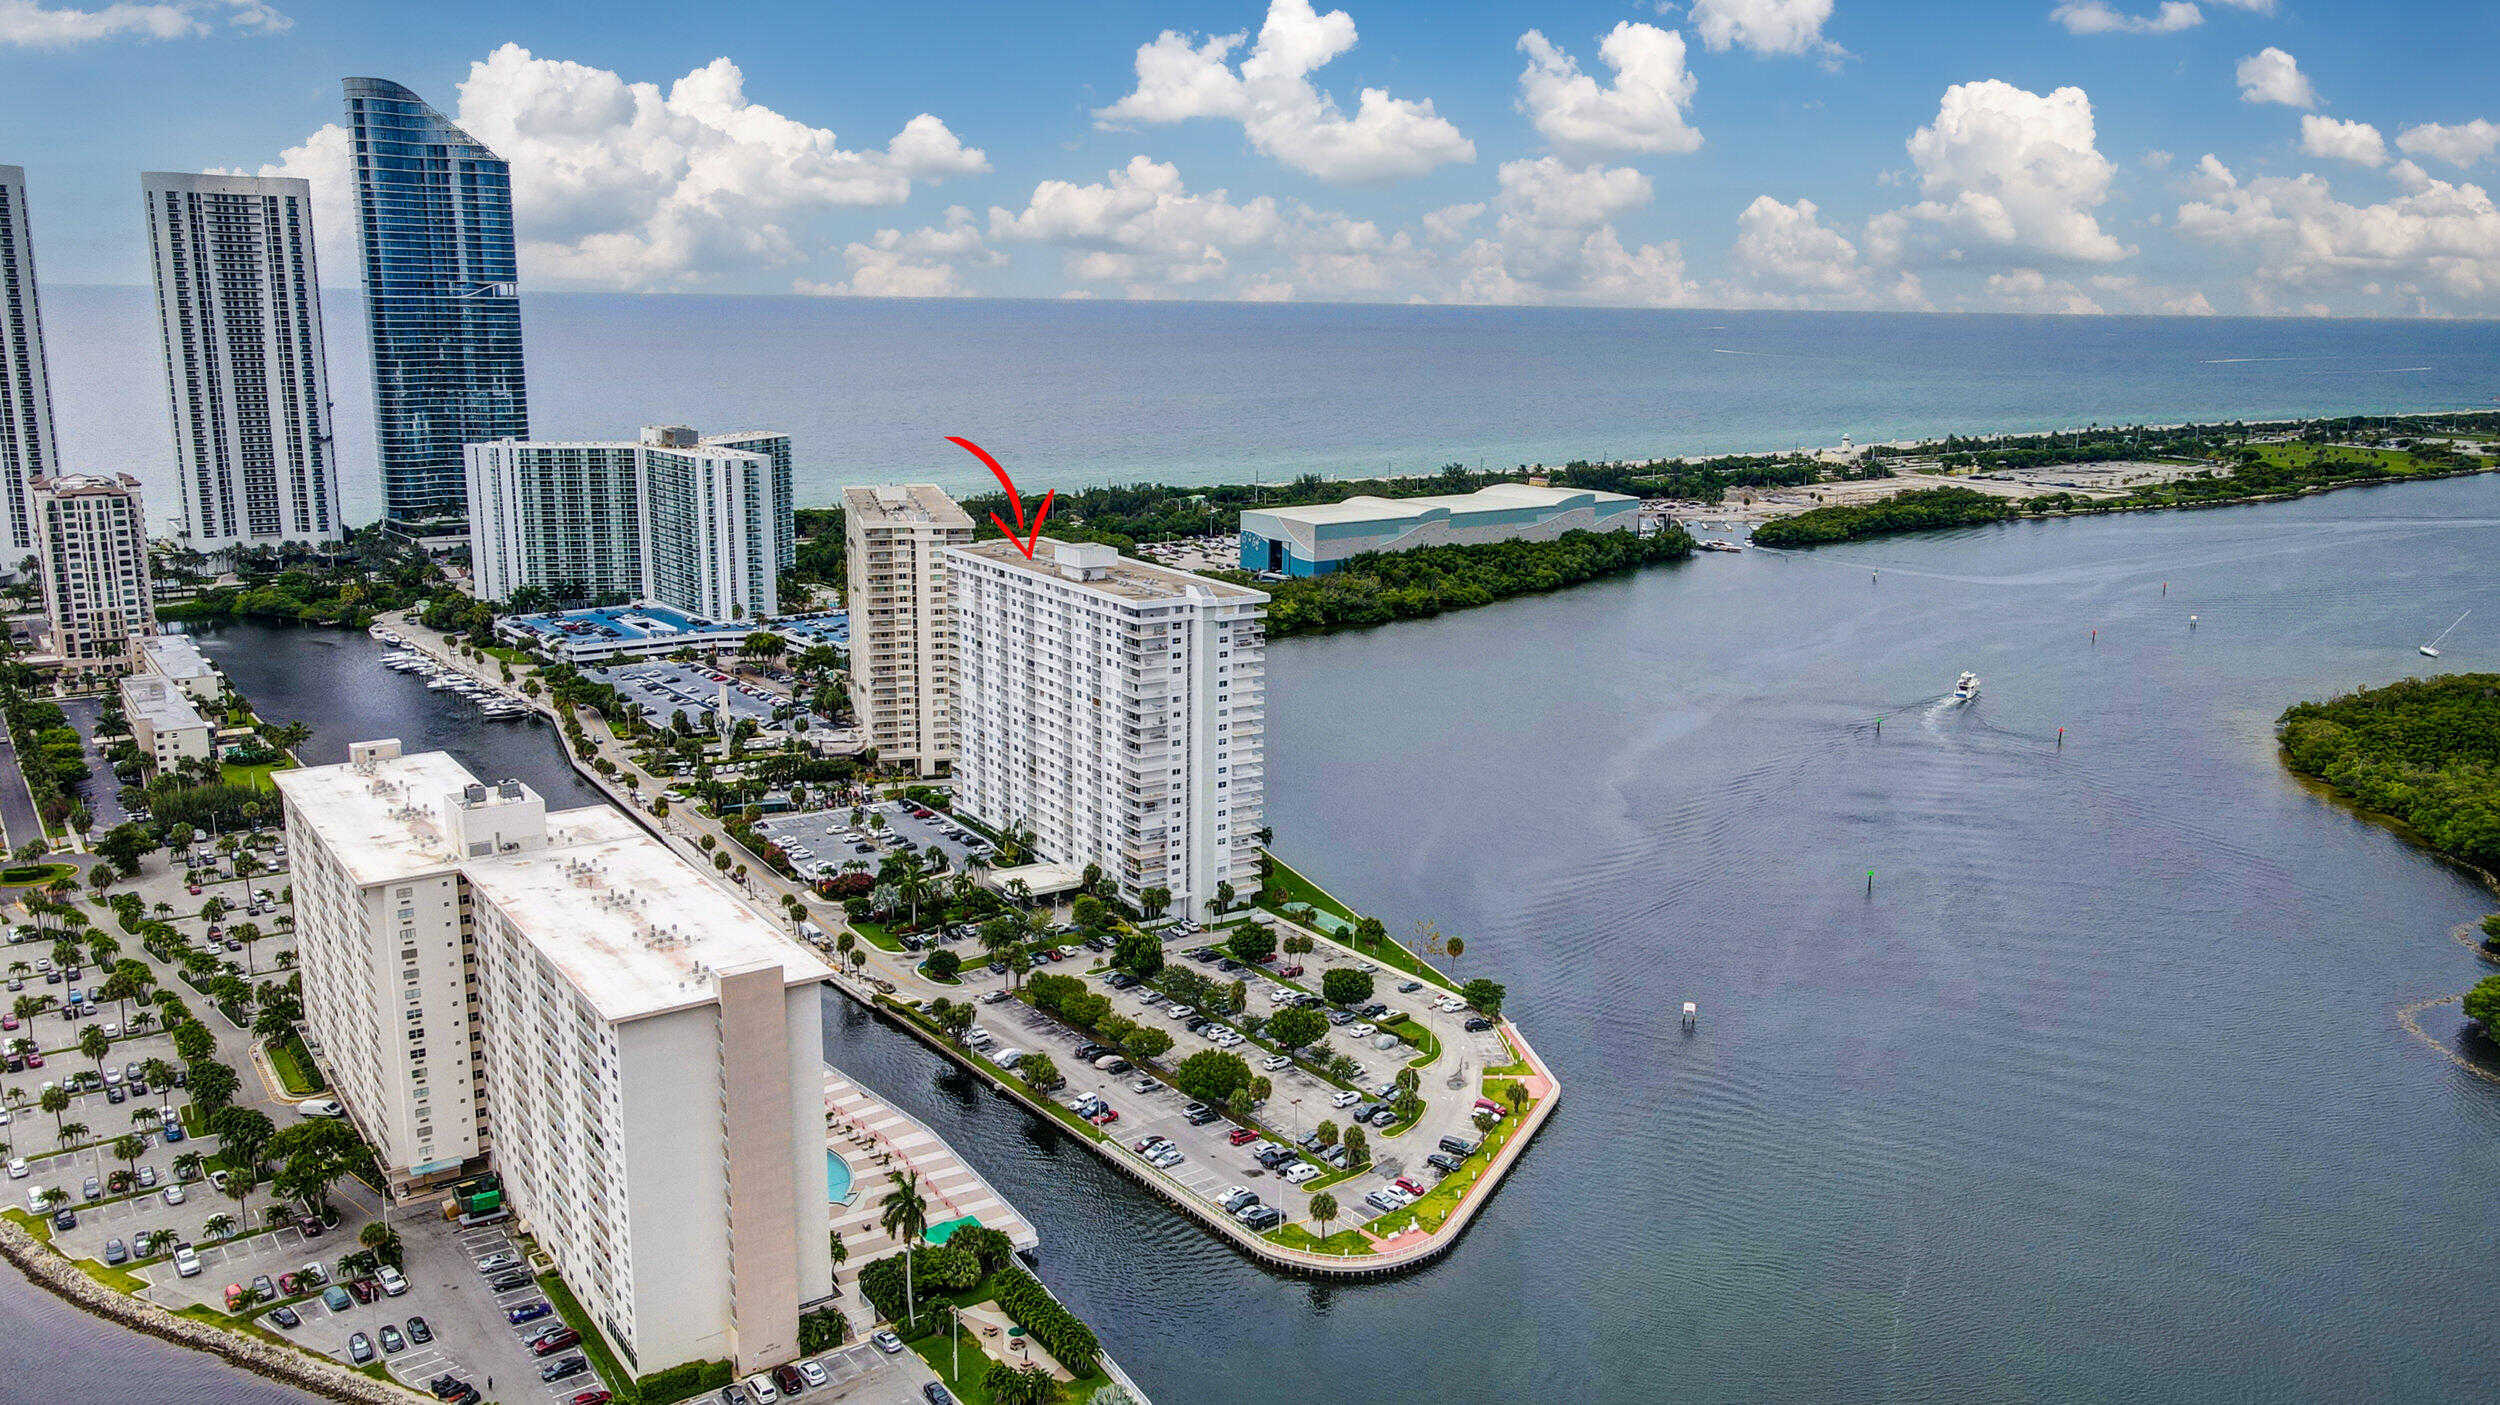 View Sunny Isles Beach, FL 33160 residential property